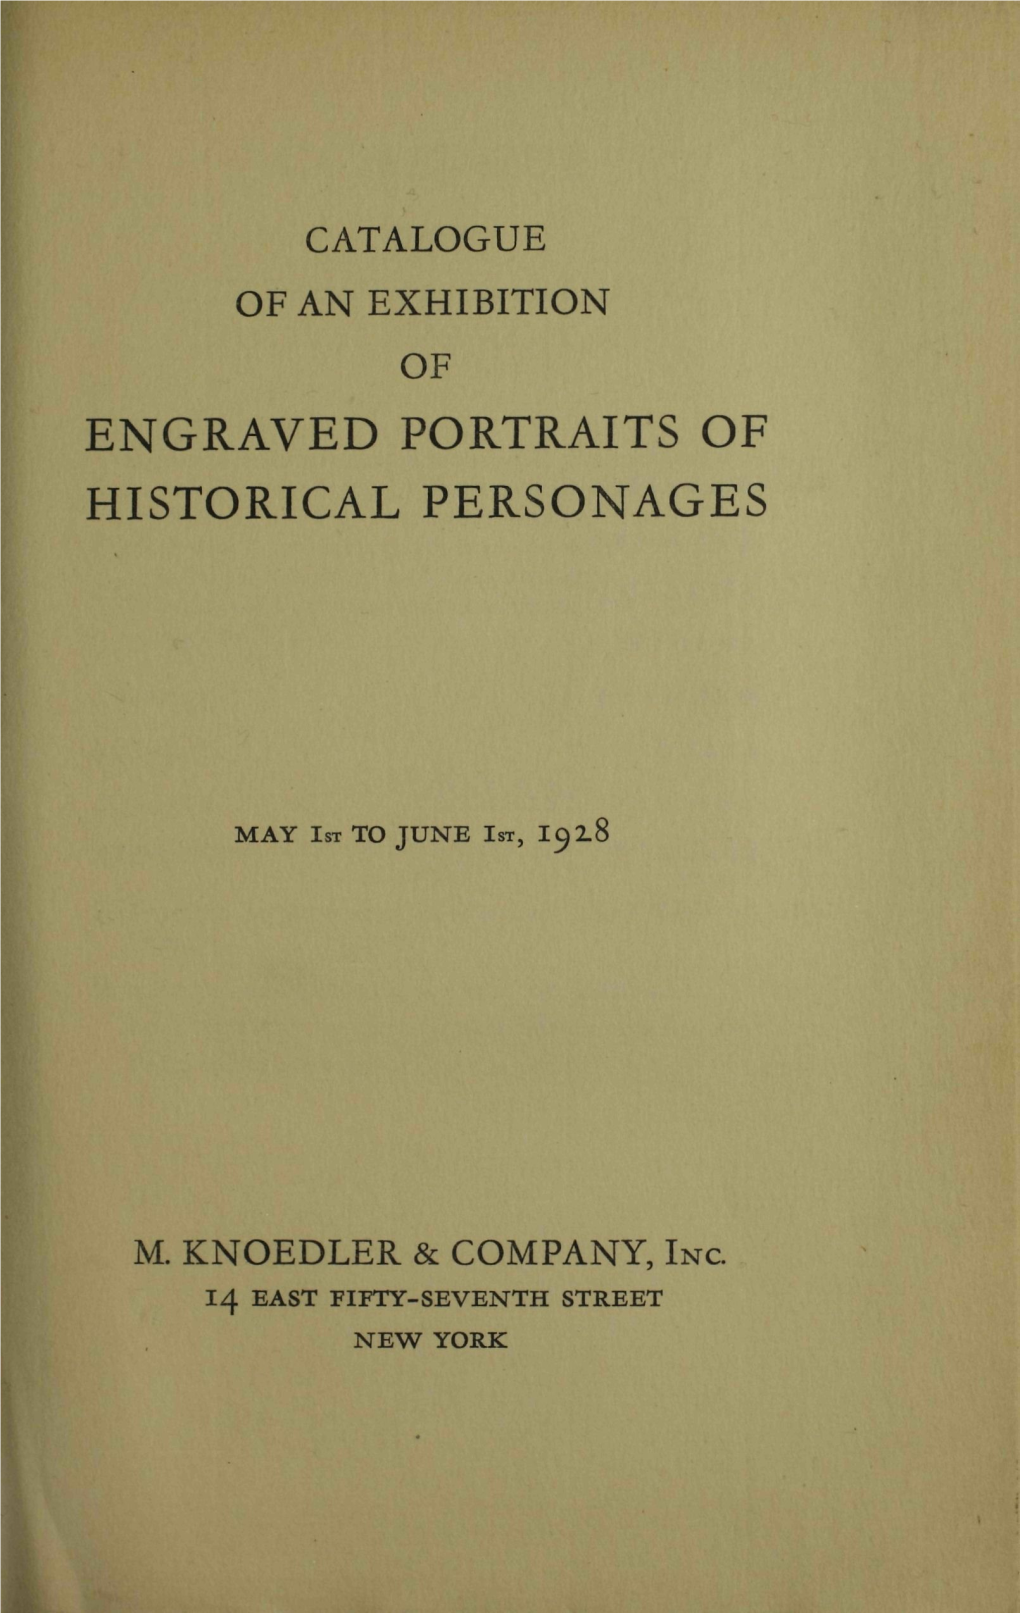 Catalogue of an Exhibition of Engraved Portraits of Historical Personages